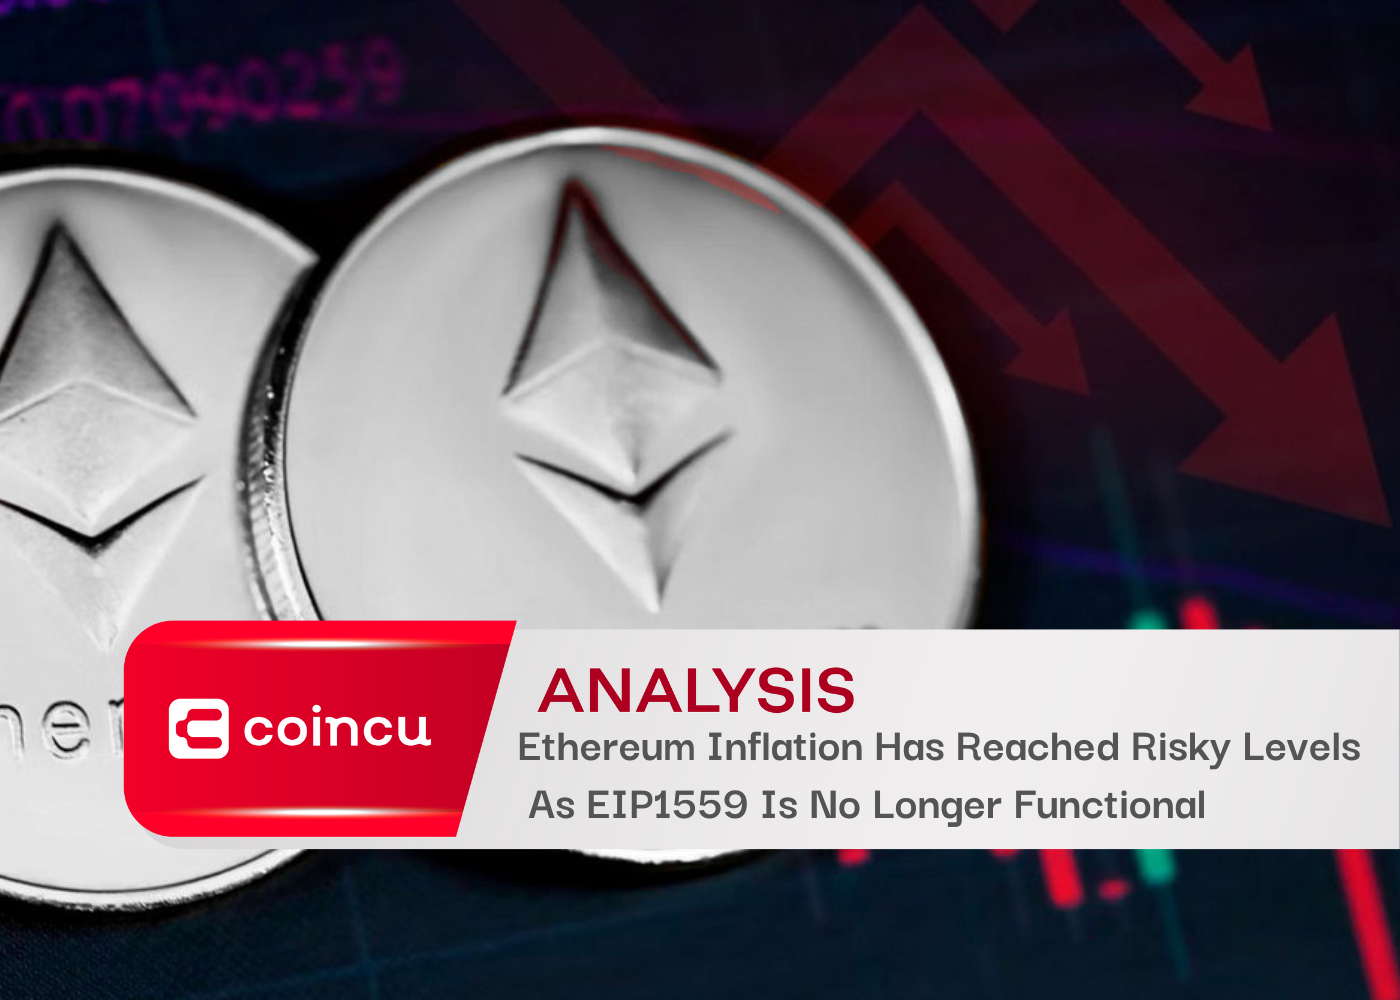 Ethereum Inflation Has Reached Risky Levels